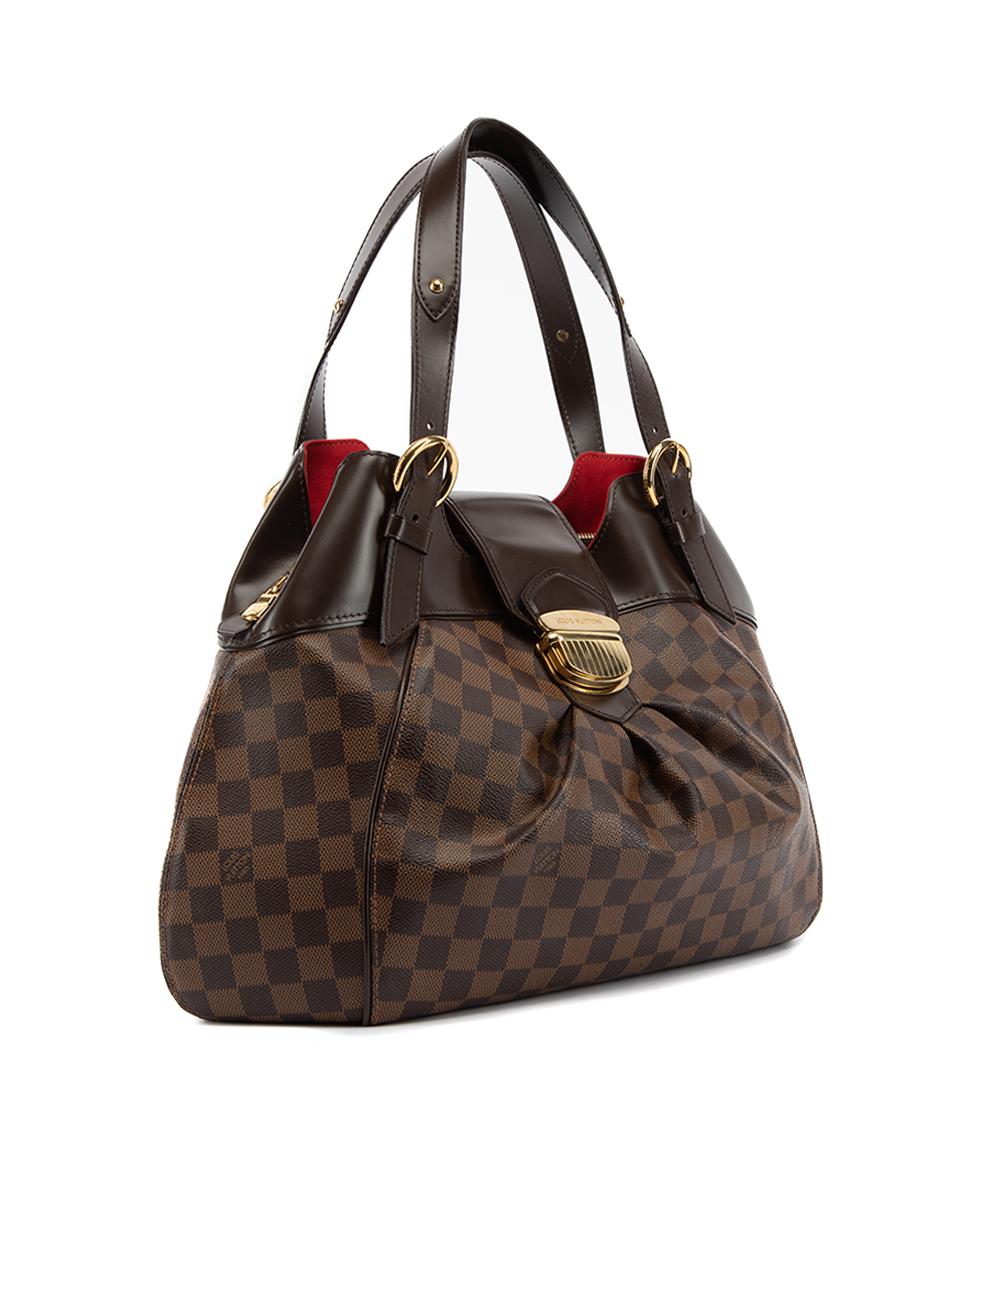 CONDITION is Very good. Hardly any visible wear to bag is evident on this used Louis Vuitton designer resale item. This item includes the original dustbag and proof of purchase.  Details  Brown Canvas and leather Large tote style bag Signature